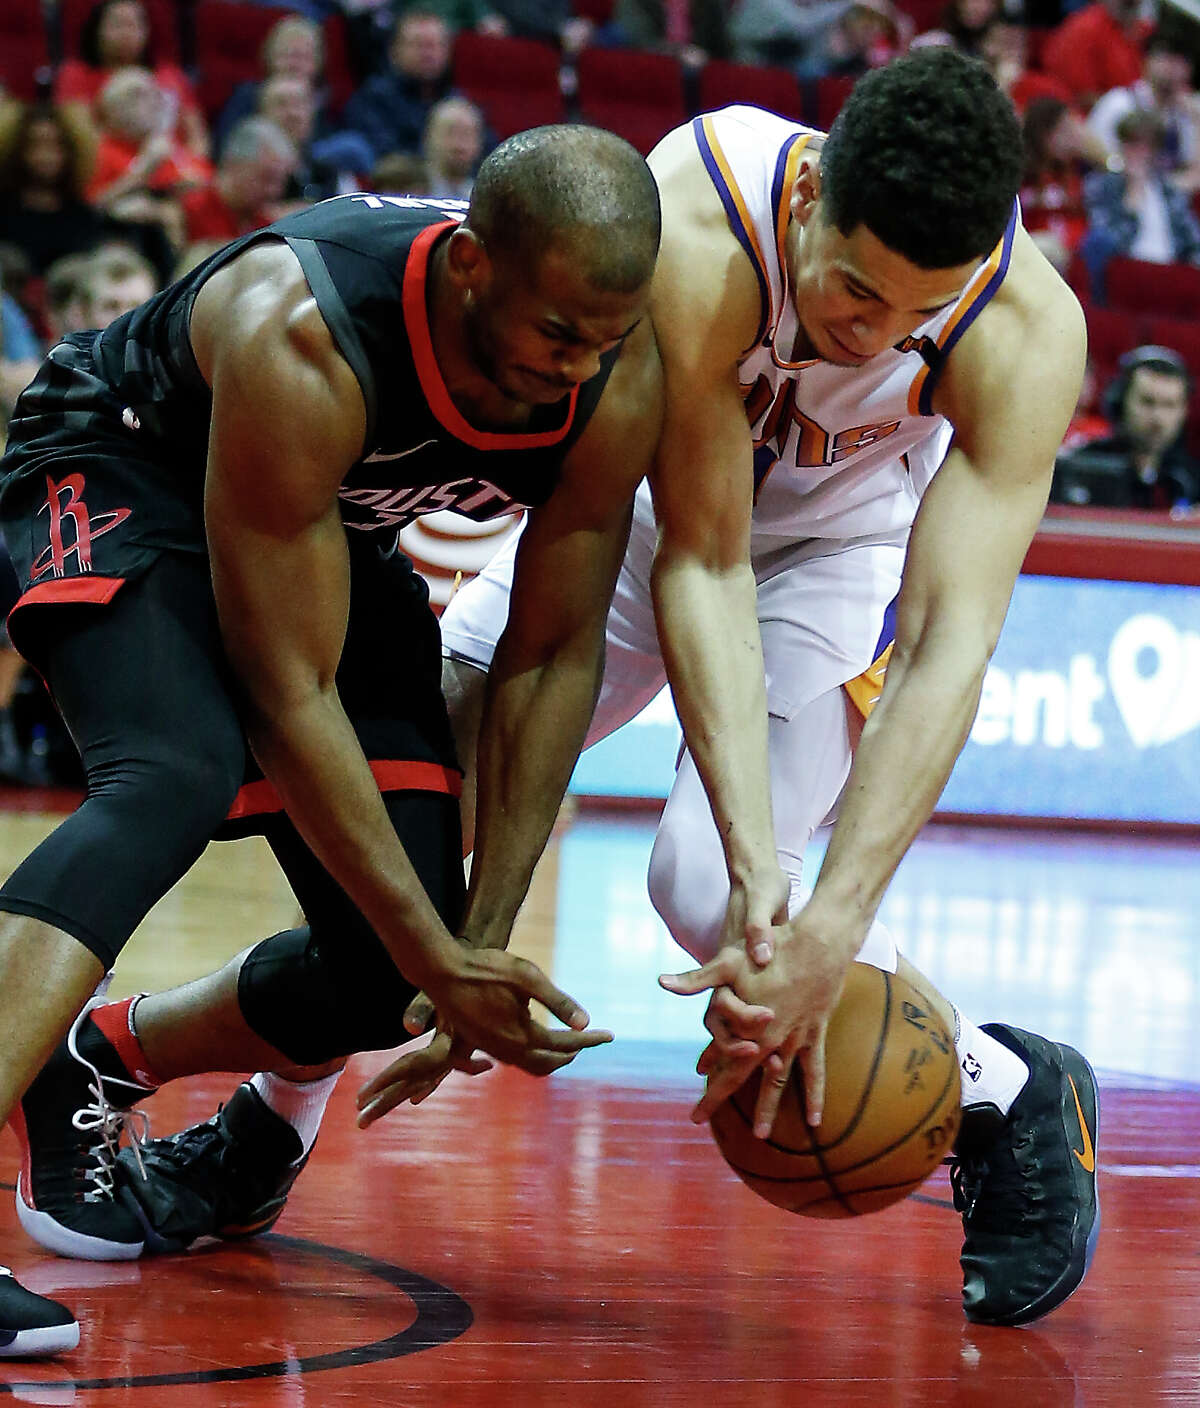 Houston Rockets guard Chris Paul (3) and Phoenix Suns guard Devin Booker (1) go after a loose ball during the first quarter of an NBA basketball game at Toyota Center on Sunday, Jan. 28, 2018, in Houston. ( Brett Coomer / Houston Chronicle )